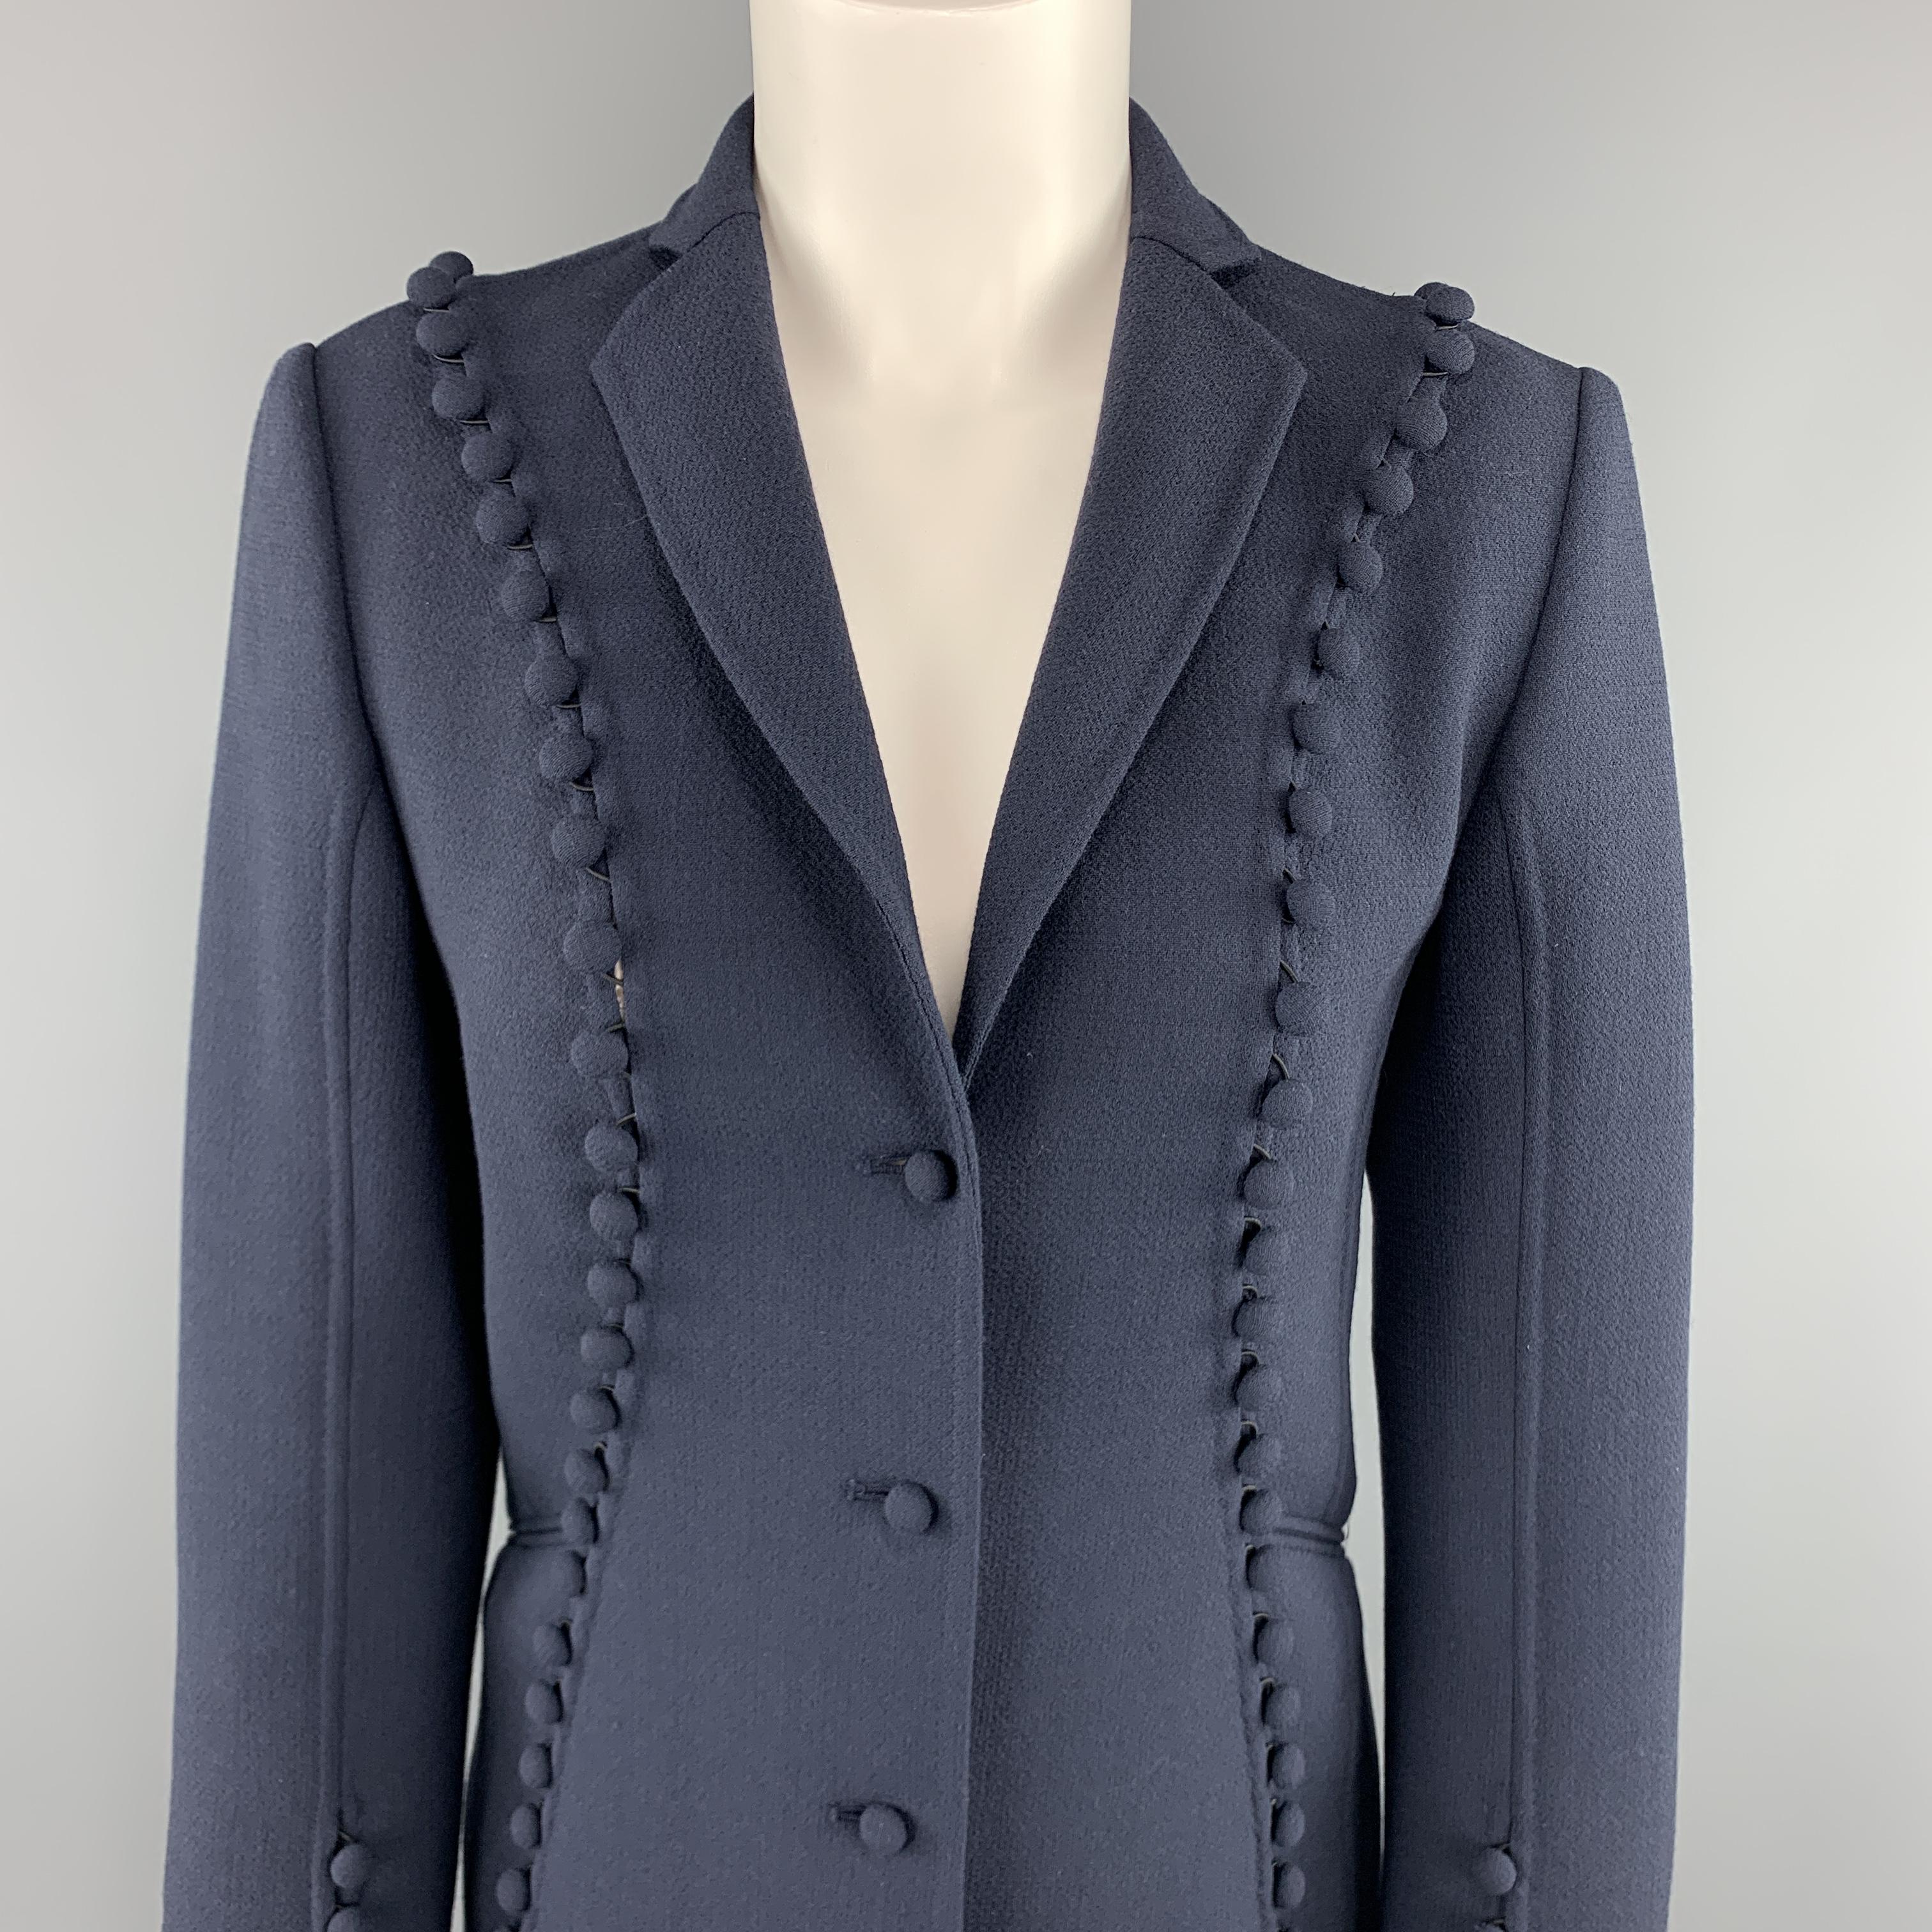 CHADO RALPH RUCCI blazer comes in a muted navy blue crepe wool with a notch lapel, single breasted three button front, and slit cutout trim with fabric button embellishments. Made in USA.

Excellent Pre-Owned Condition.
Marked: